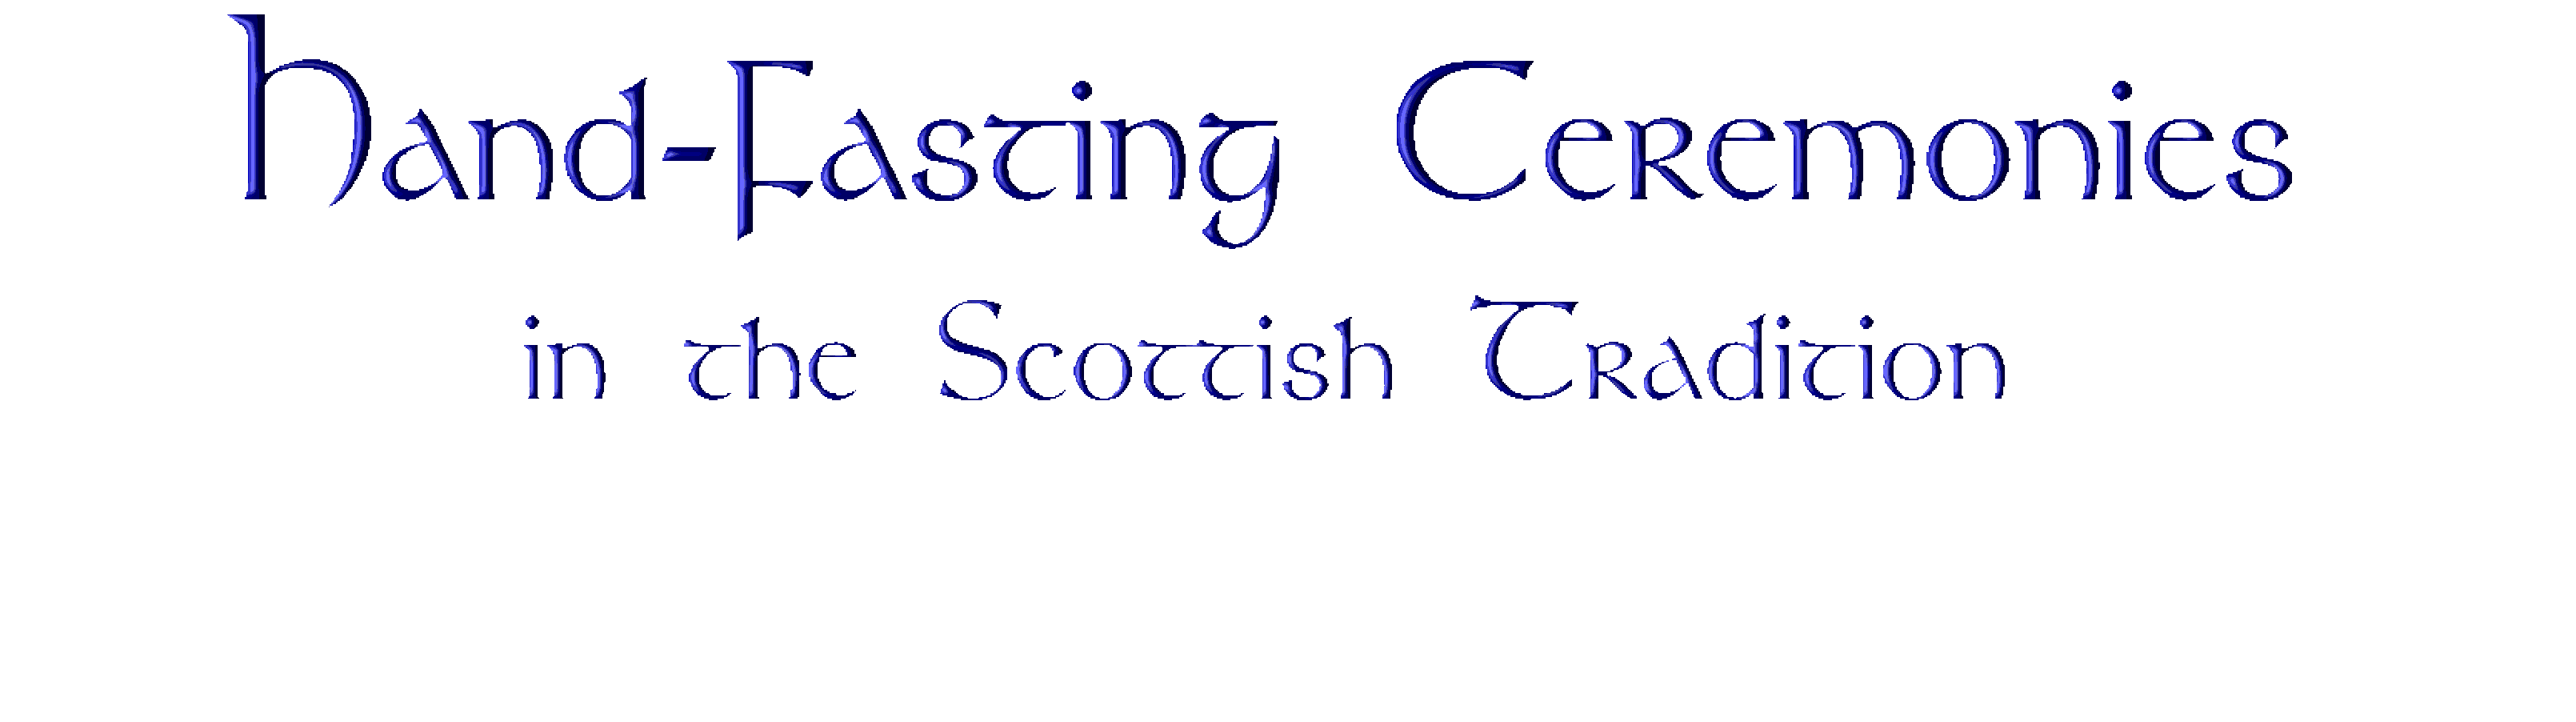 HandFasting Ceremonies in the Scottish Tradition